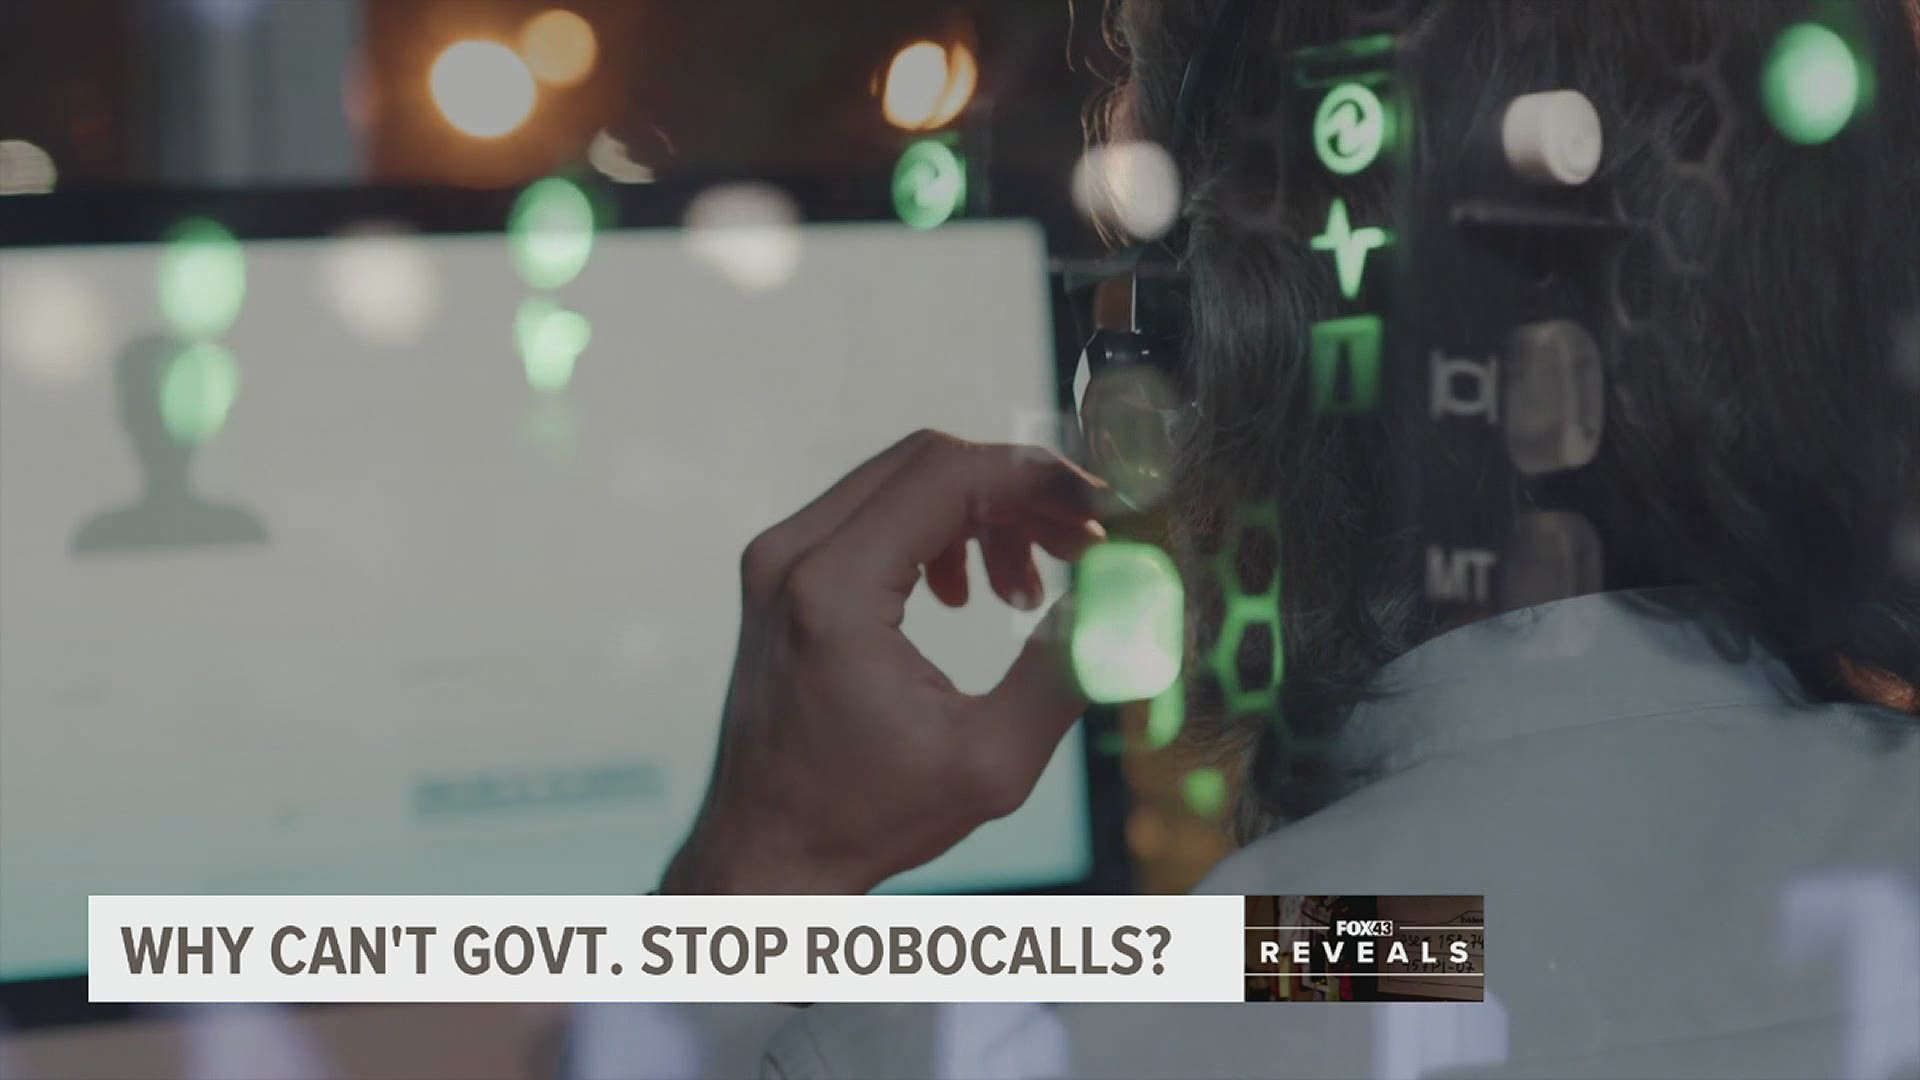 There’s a resounding agreement among multiple agencies to put an end to robocalls. Yet, Americans received 4.4 billion robocalls just last month.